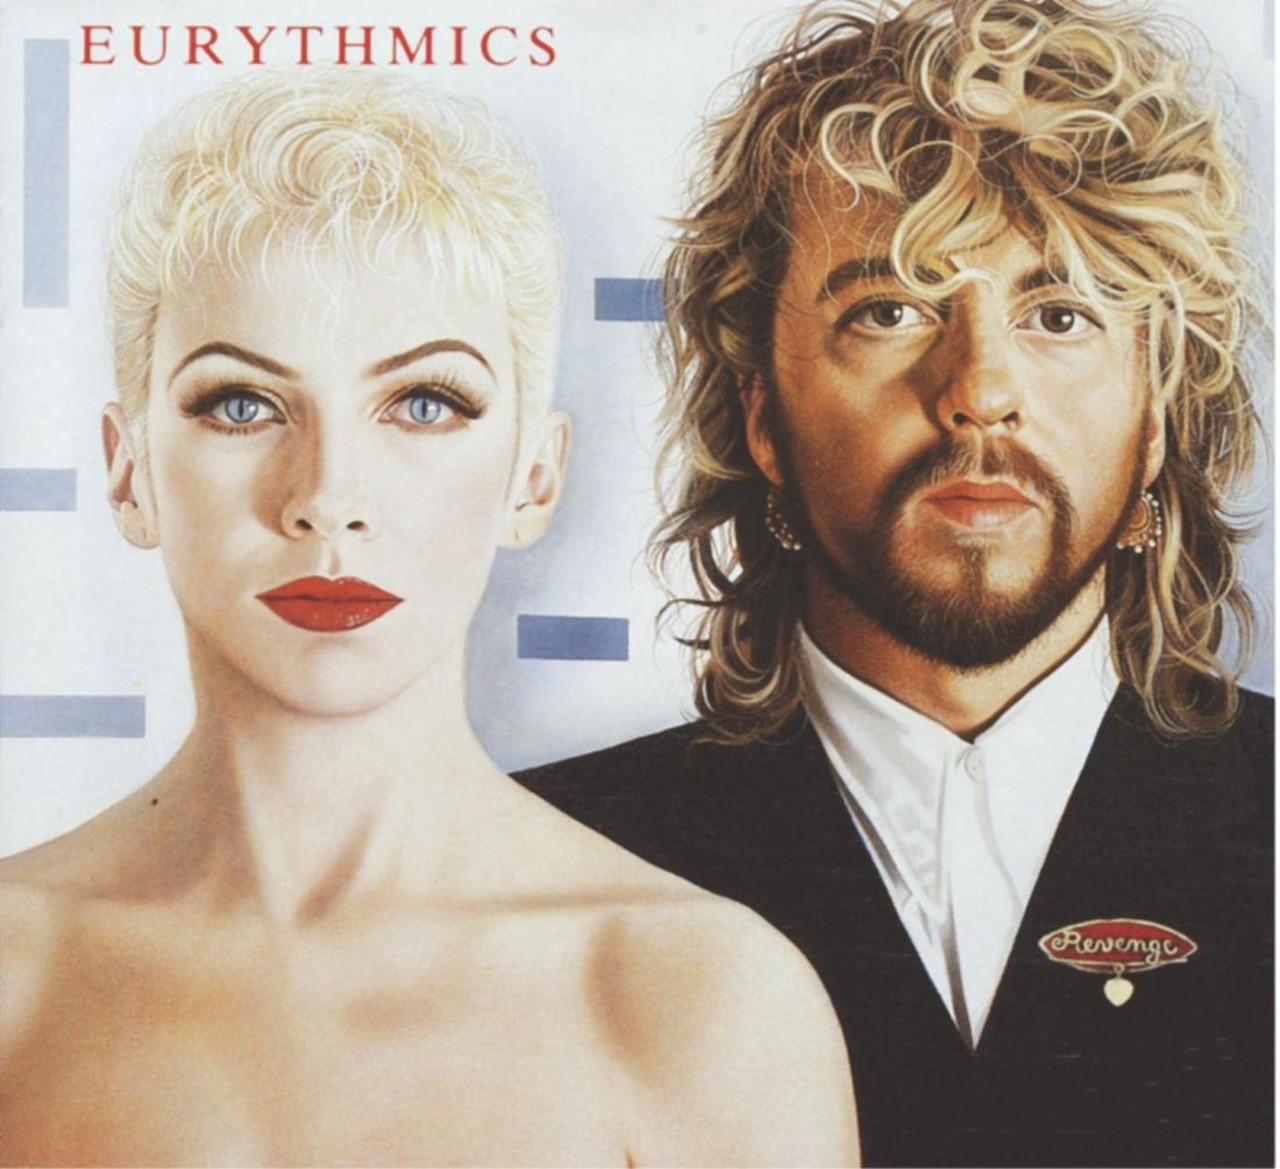 Eurythmics
The British music duo featuring singer Annie Lennox and producer David A. Stewart pioneered the synth pop/New Wave sound that would become so popular in the '80s. While the band would split up in 1990, it left behind a legacy of hit tunes. Lennox went to have a semi-successful solo career, and Stewart became a sought-after producer. The group has been eligible for 12 years and was nominated for induction this year but didn't make the cut. 
Album Artwork